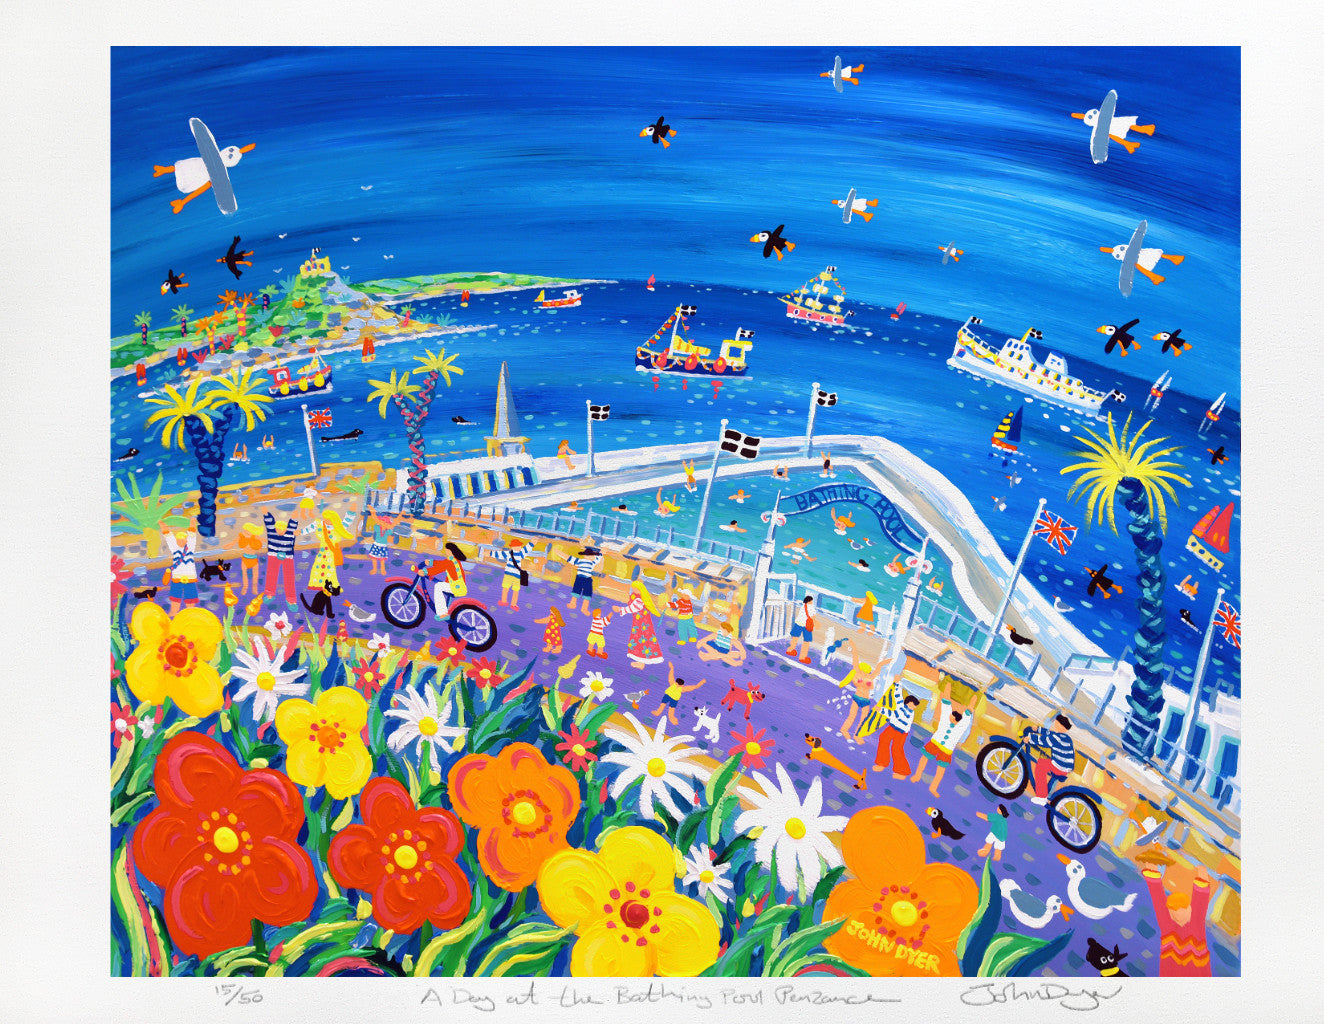 Cornish Art Signed Limited Edition Print by Artist John Dyer. 'A Day at the Jubilee Bathing Pool, Penzance'. Cornwall Art Gallery Print.